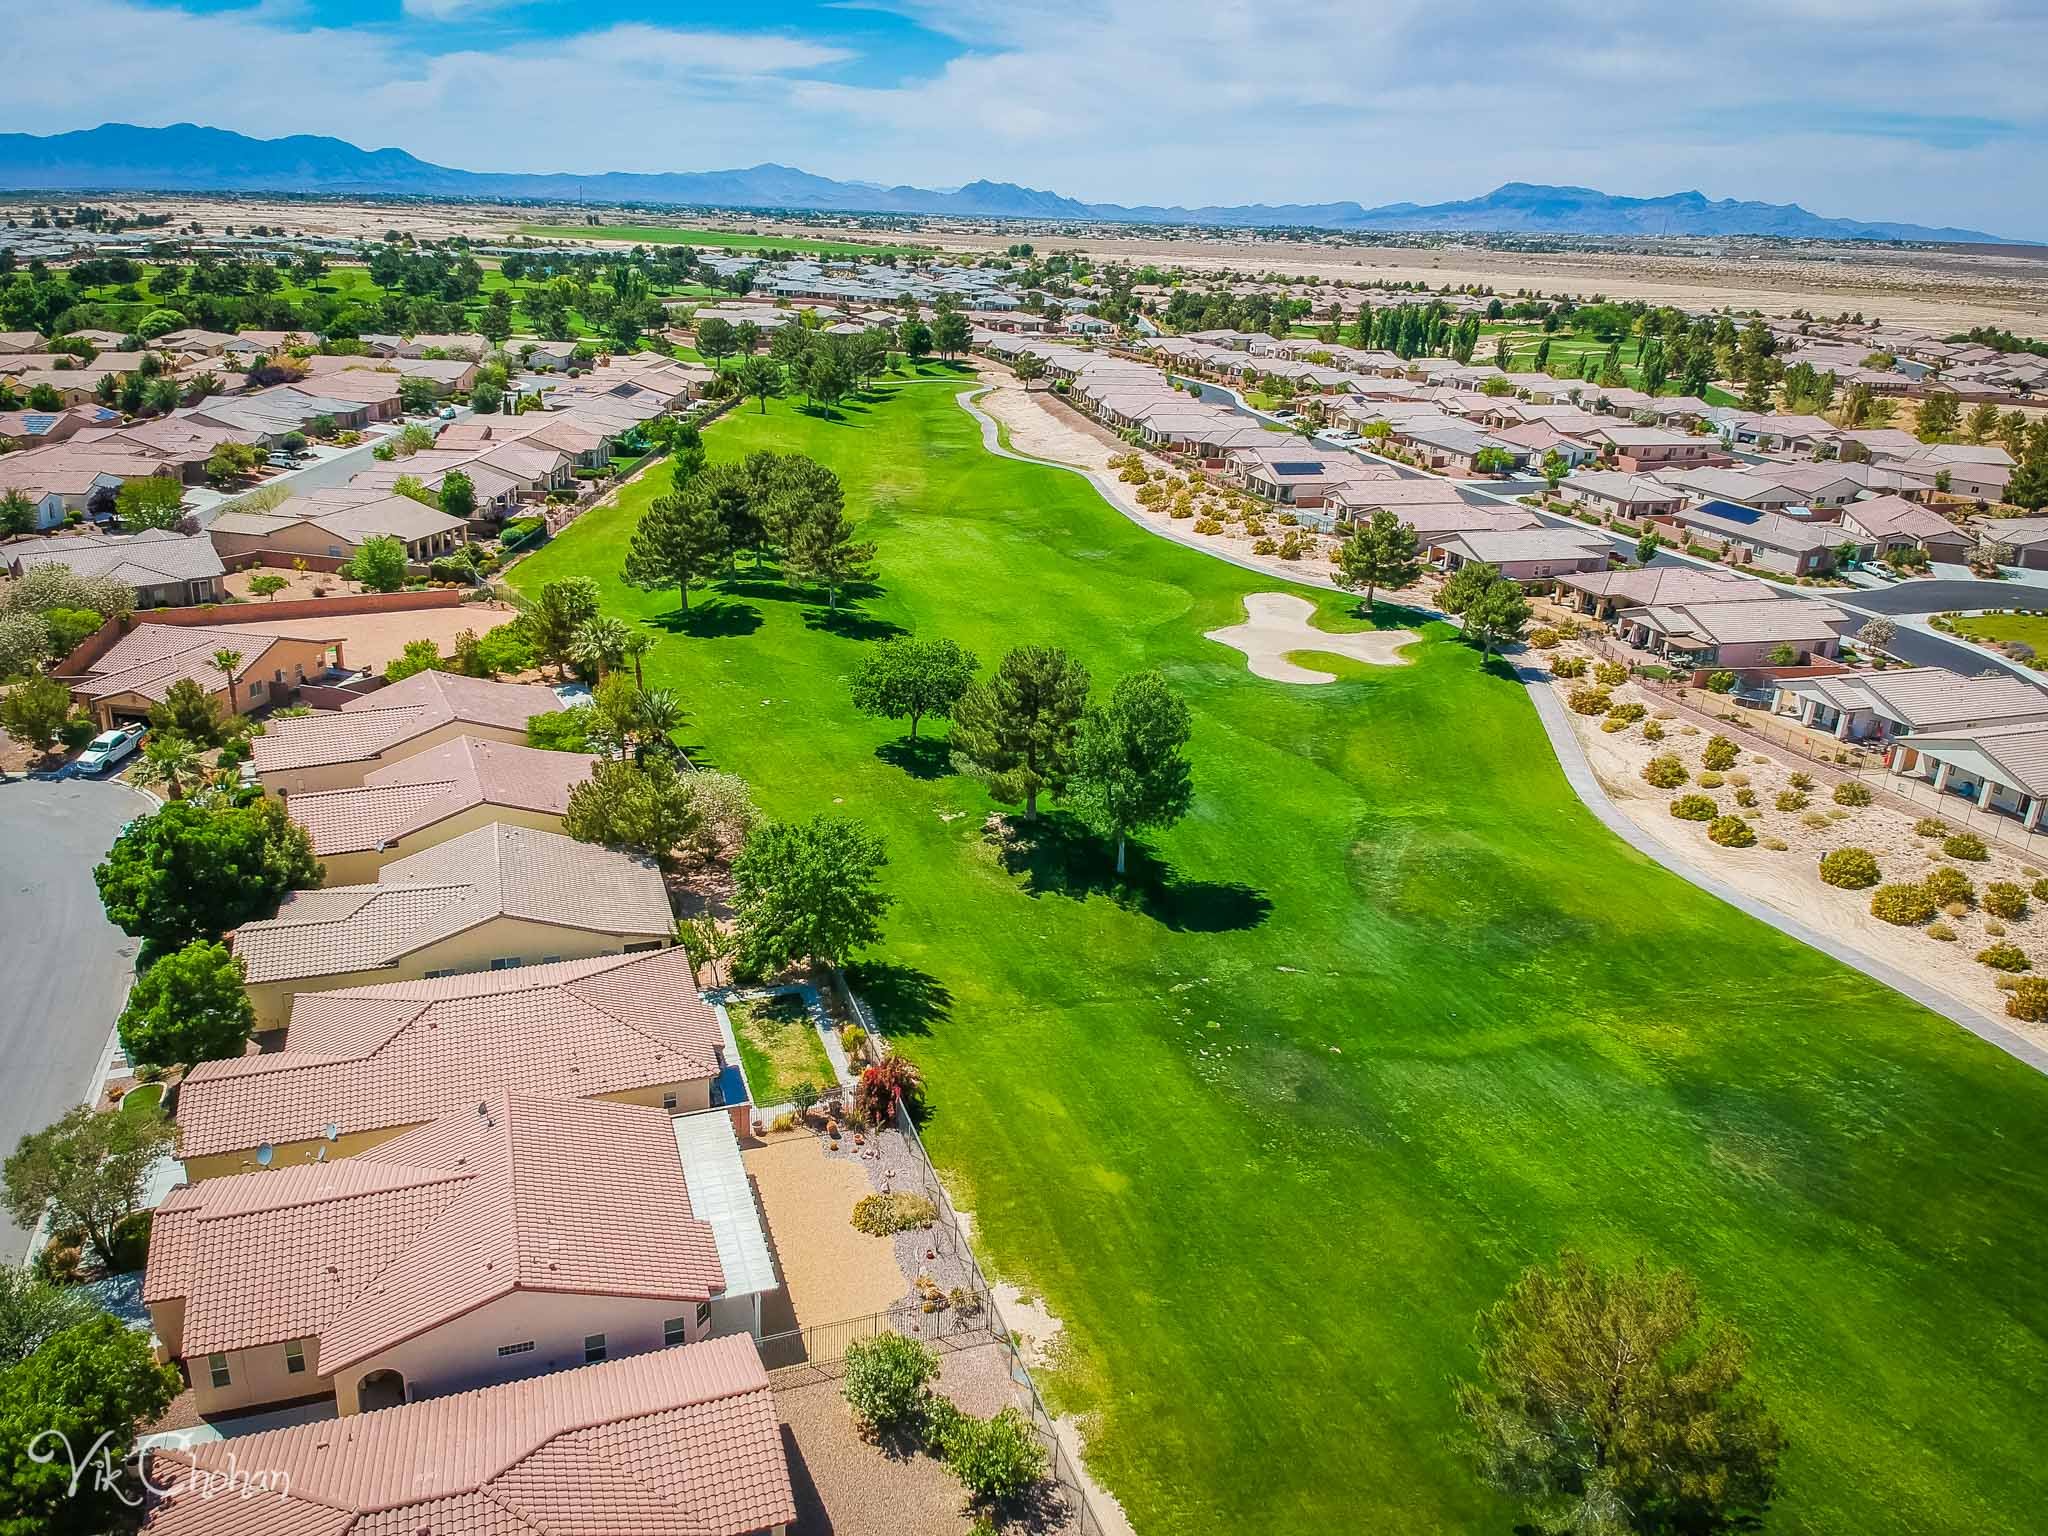 2022-05-15-5378-E-Cansano-St-Pahrump-Real-Estate-Photography-Virtual-Tour-Drone-Photography-Vik-Chohan-Photography-Photo-Booth-Social-Media-VCP-121.jpg